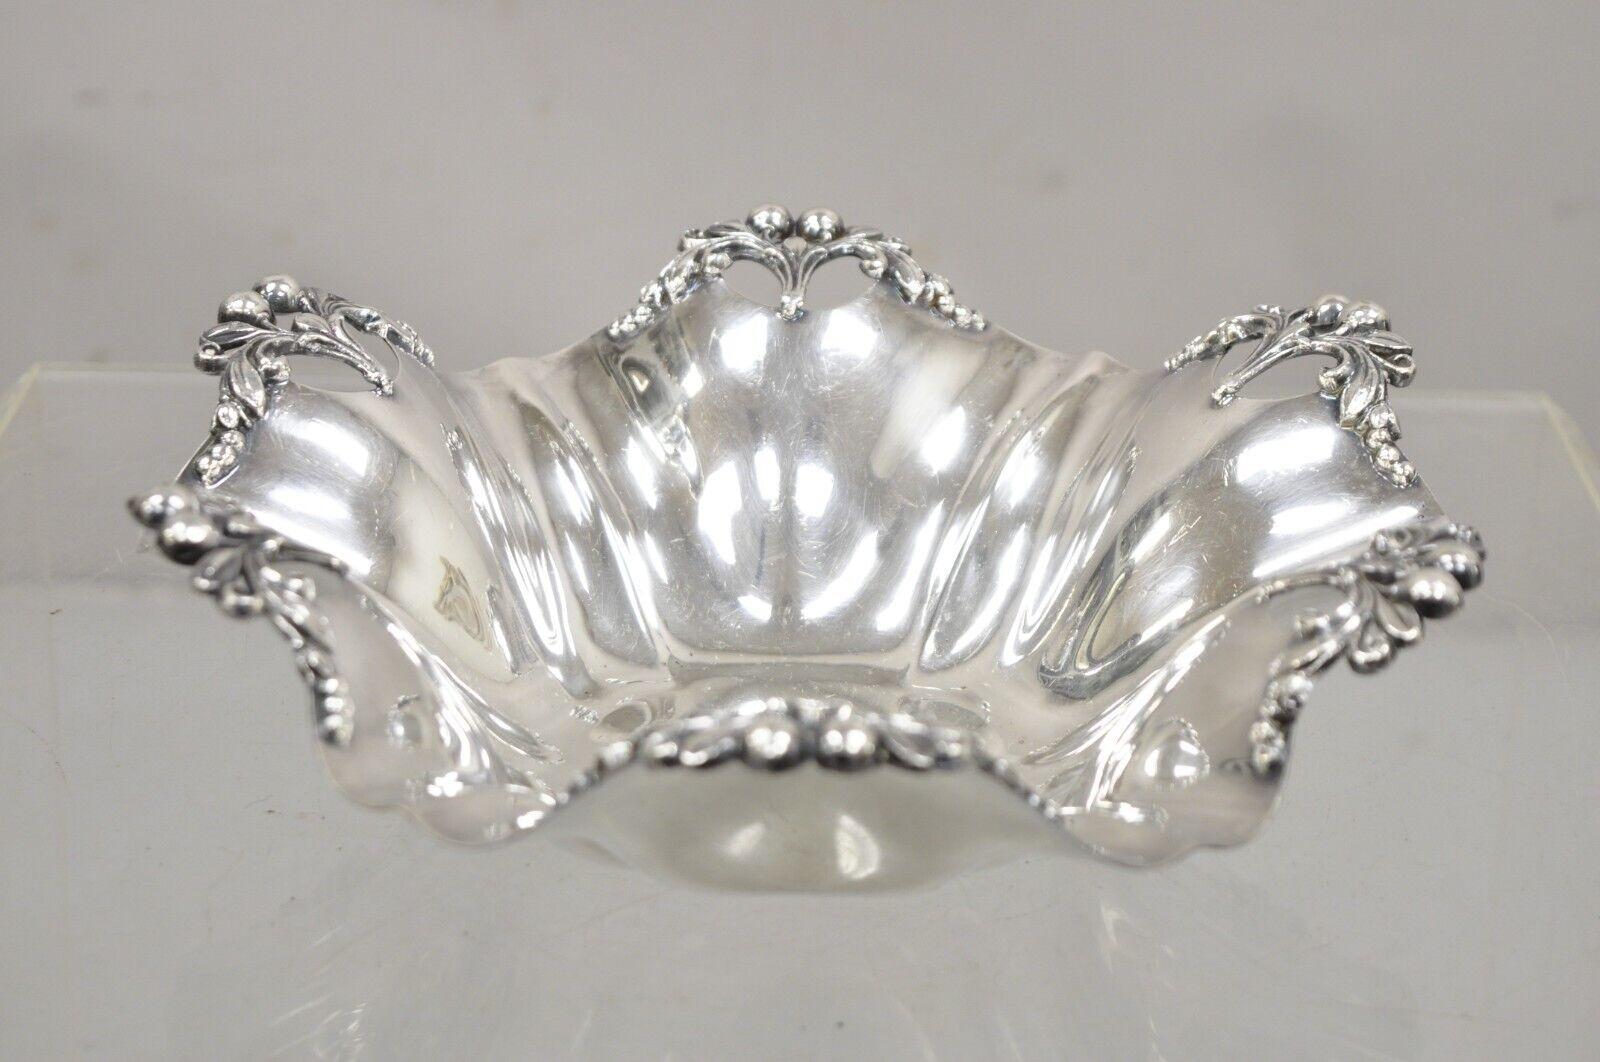 Vintage Victorian Silver Plated Handkerchief Candy Dish Fruit Bowl Berry Design For Sale 6